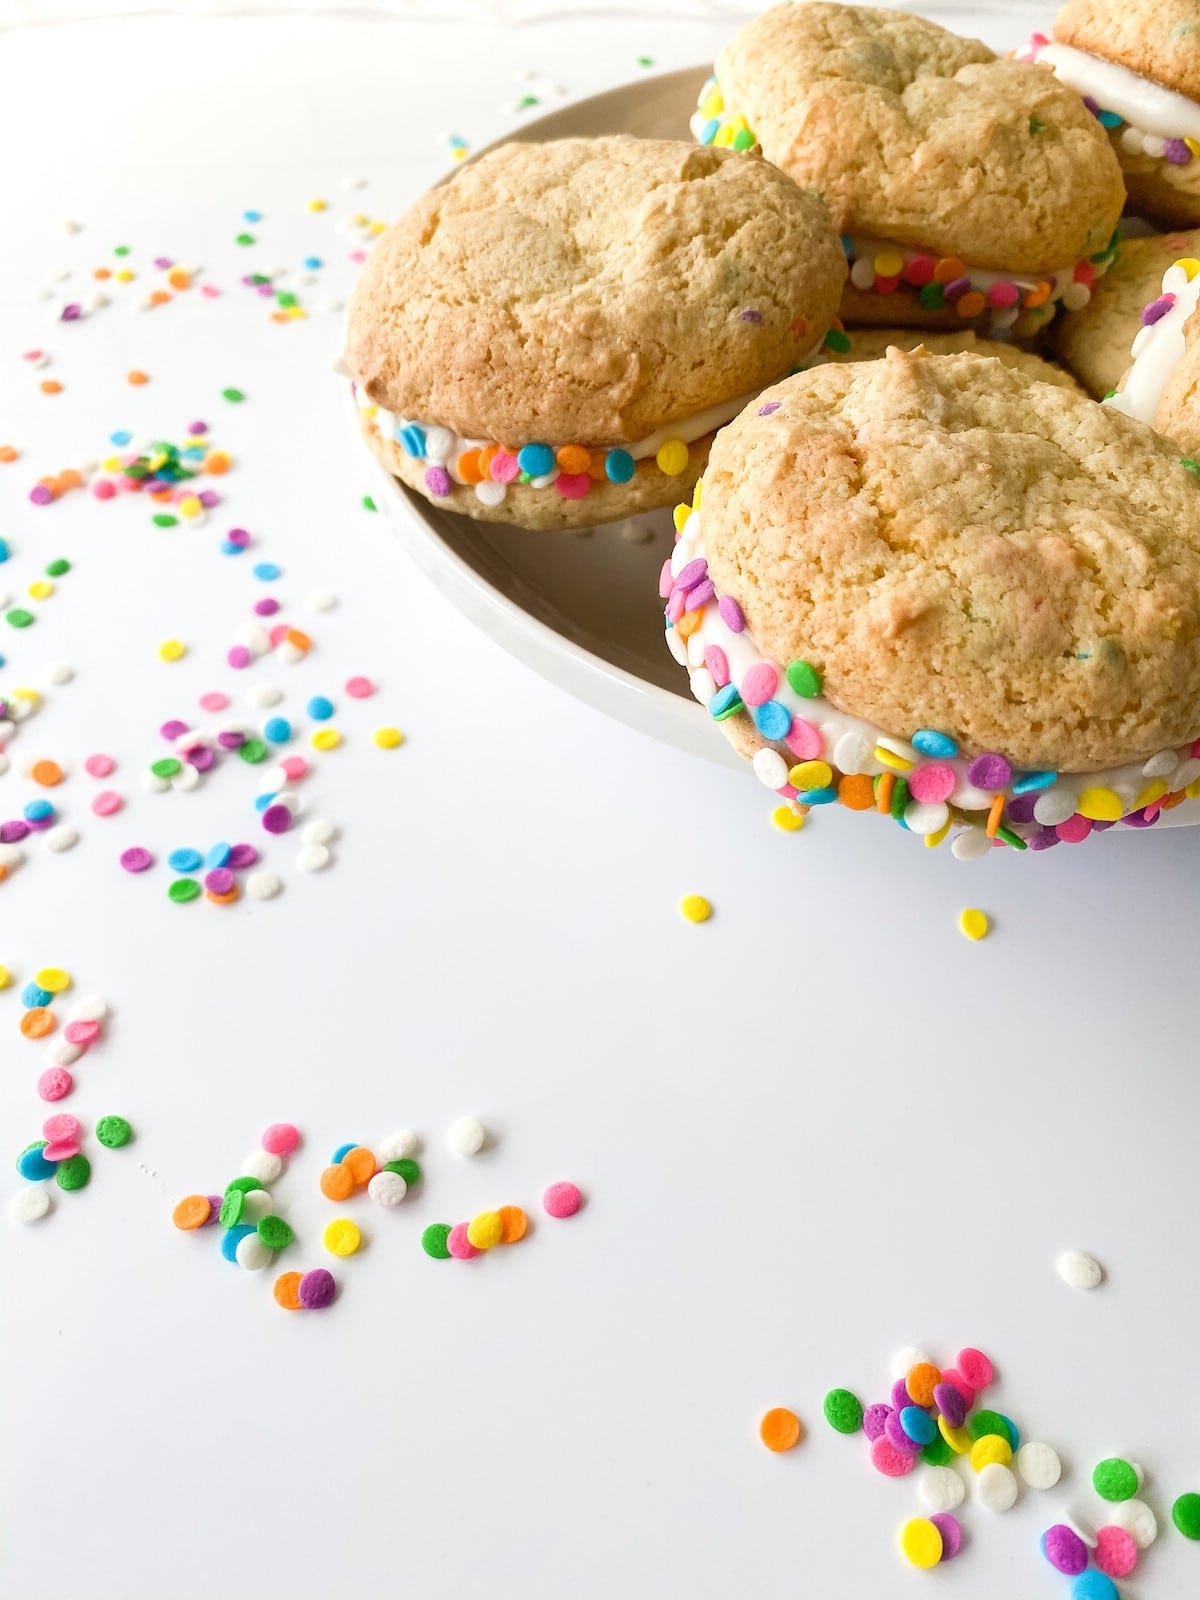 Confetti sandwich cookies stacked on platter